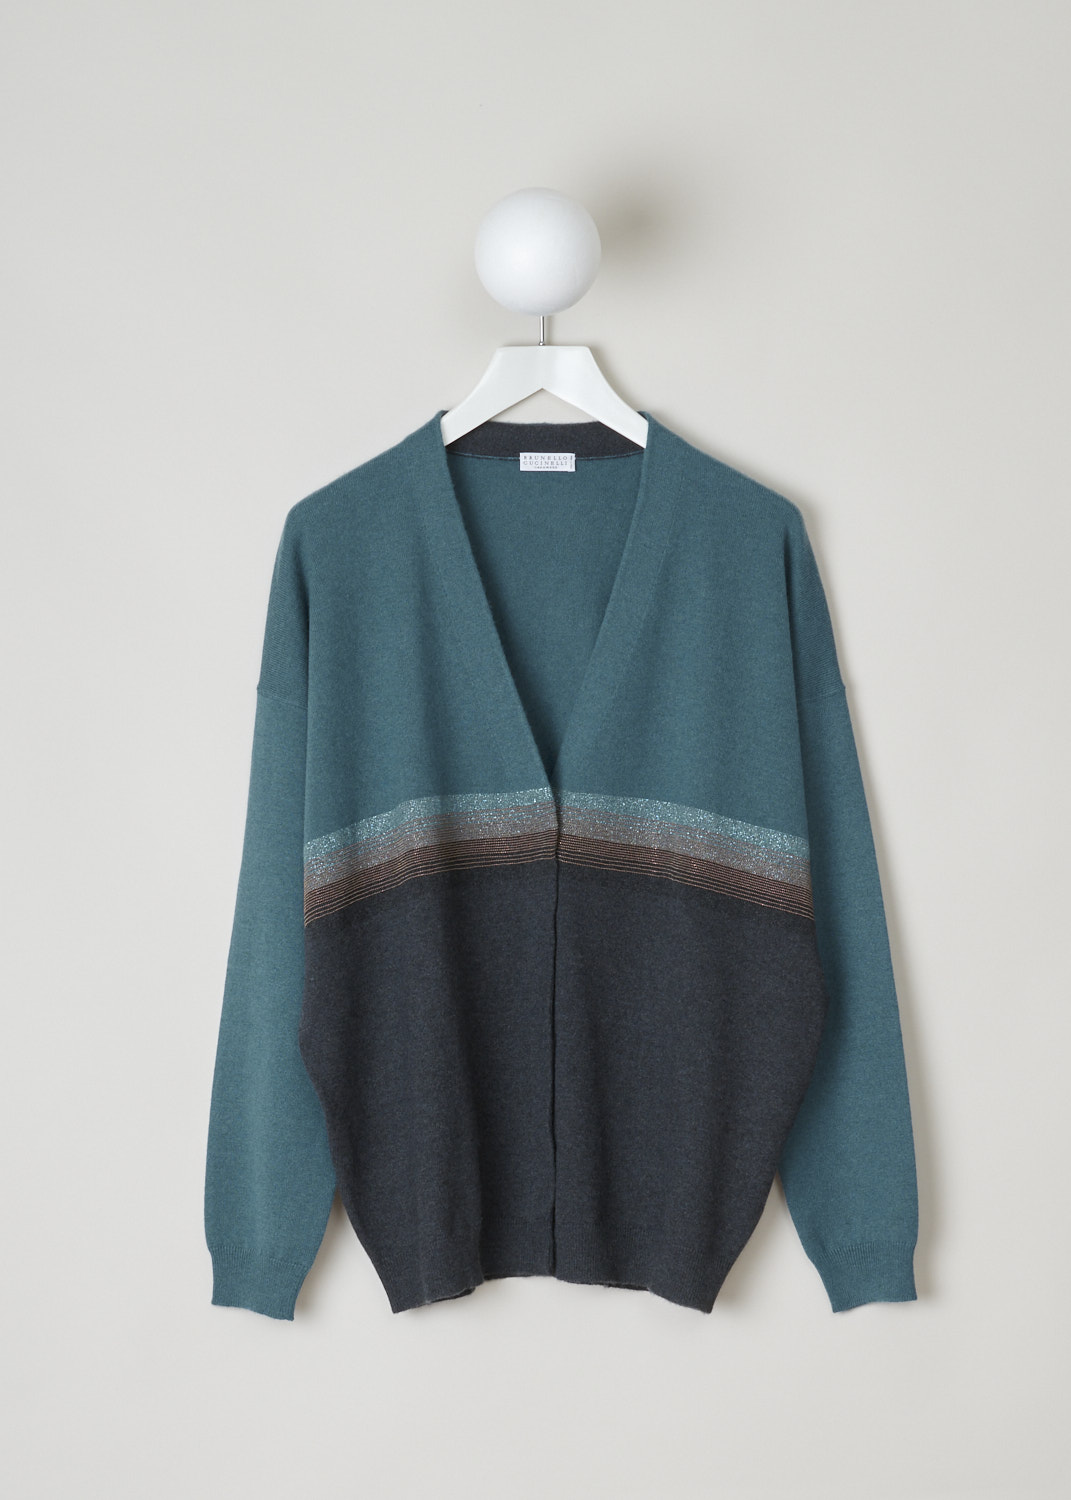 Brunello Cucinelli, Bicolour cashmere cardigan, M12149106_CV059, green grey, front, Soft cashmere cardigan in green and anthracite, with bronze metallic monili beads. featuring a deep v-neckline, concealed press studs on the front, and ribbed cuffs and hem. 